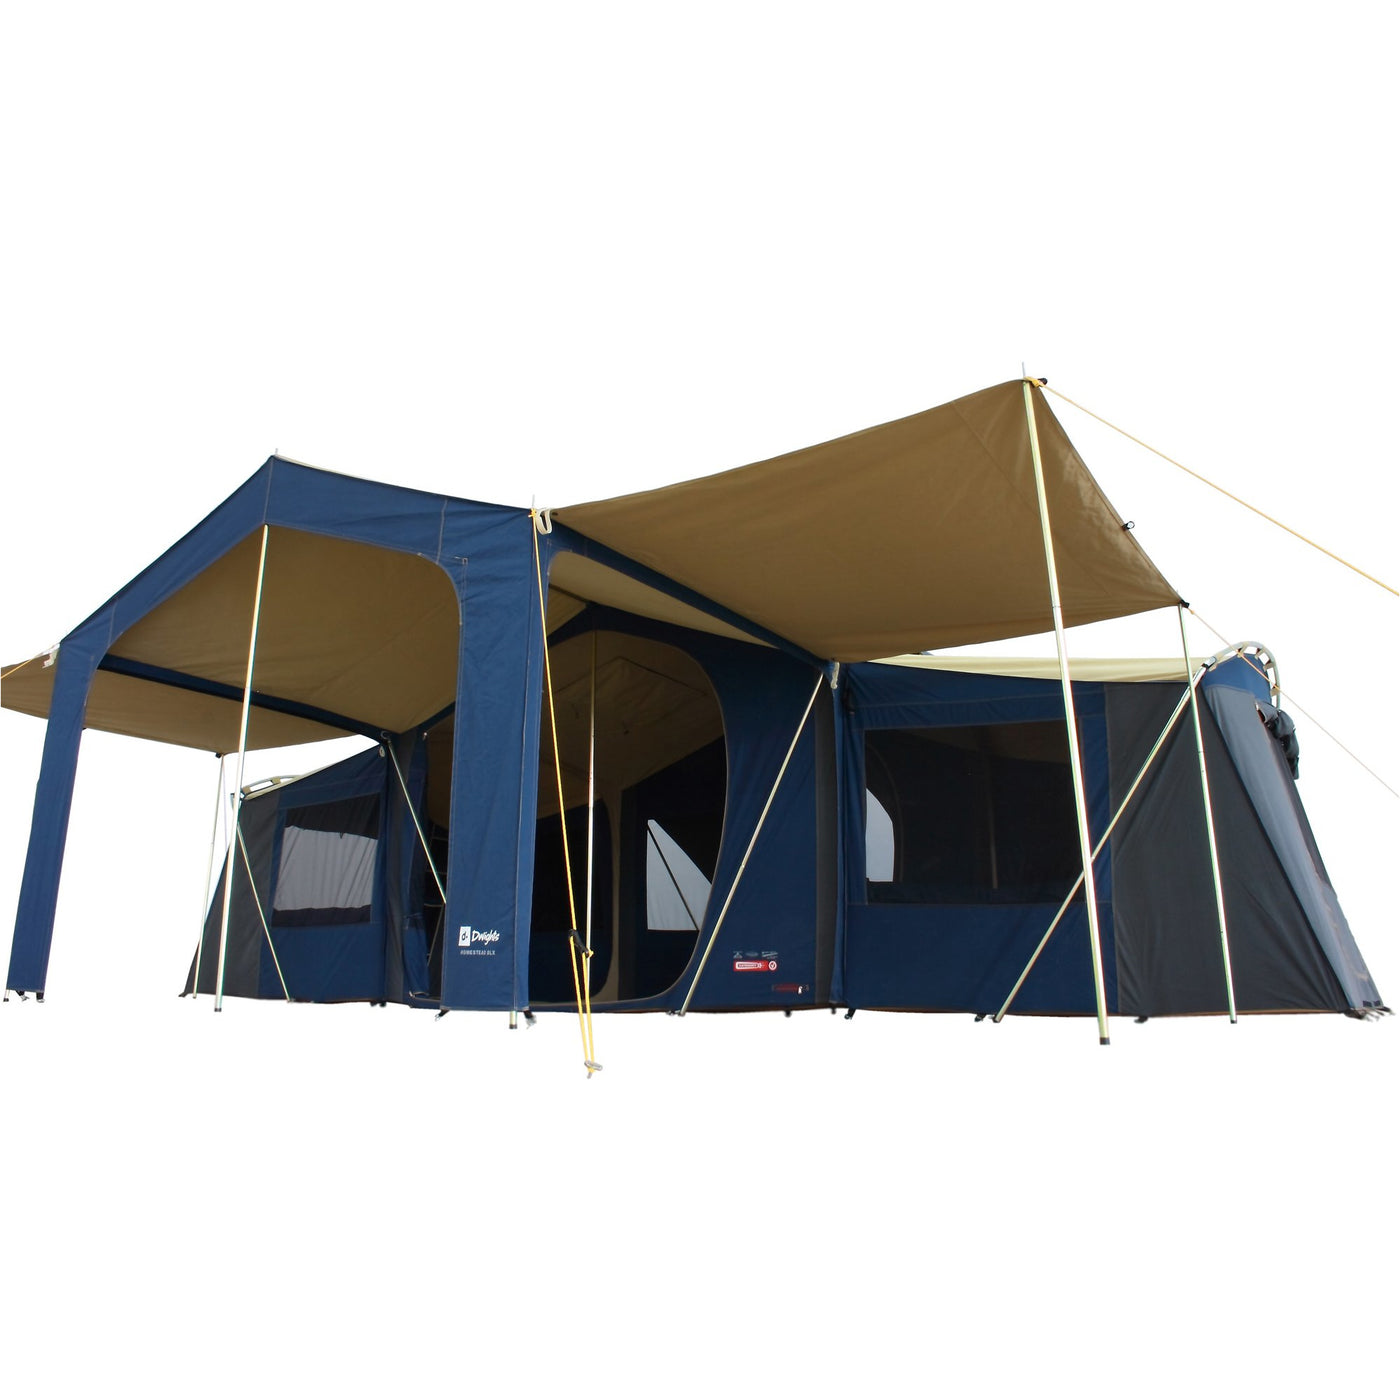 Homestead Deluxe with 2x Optional veranda awnings attached.